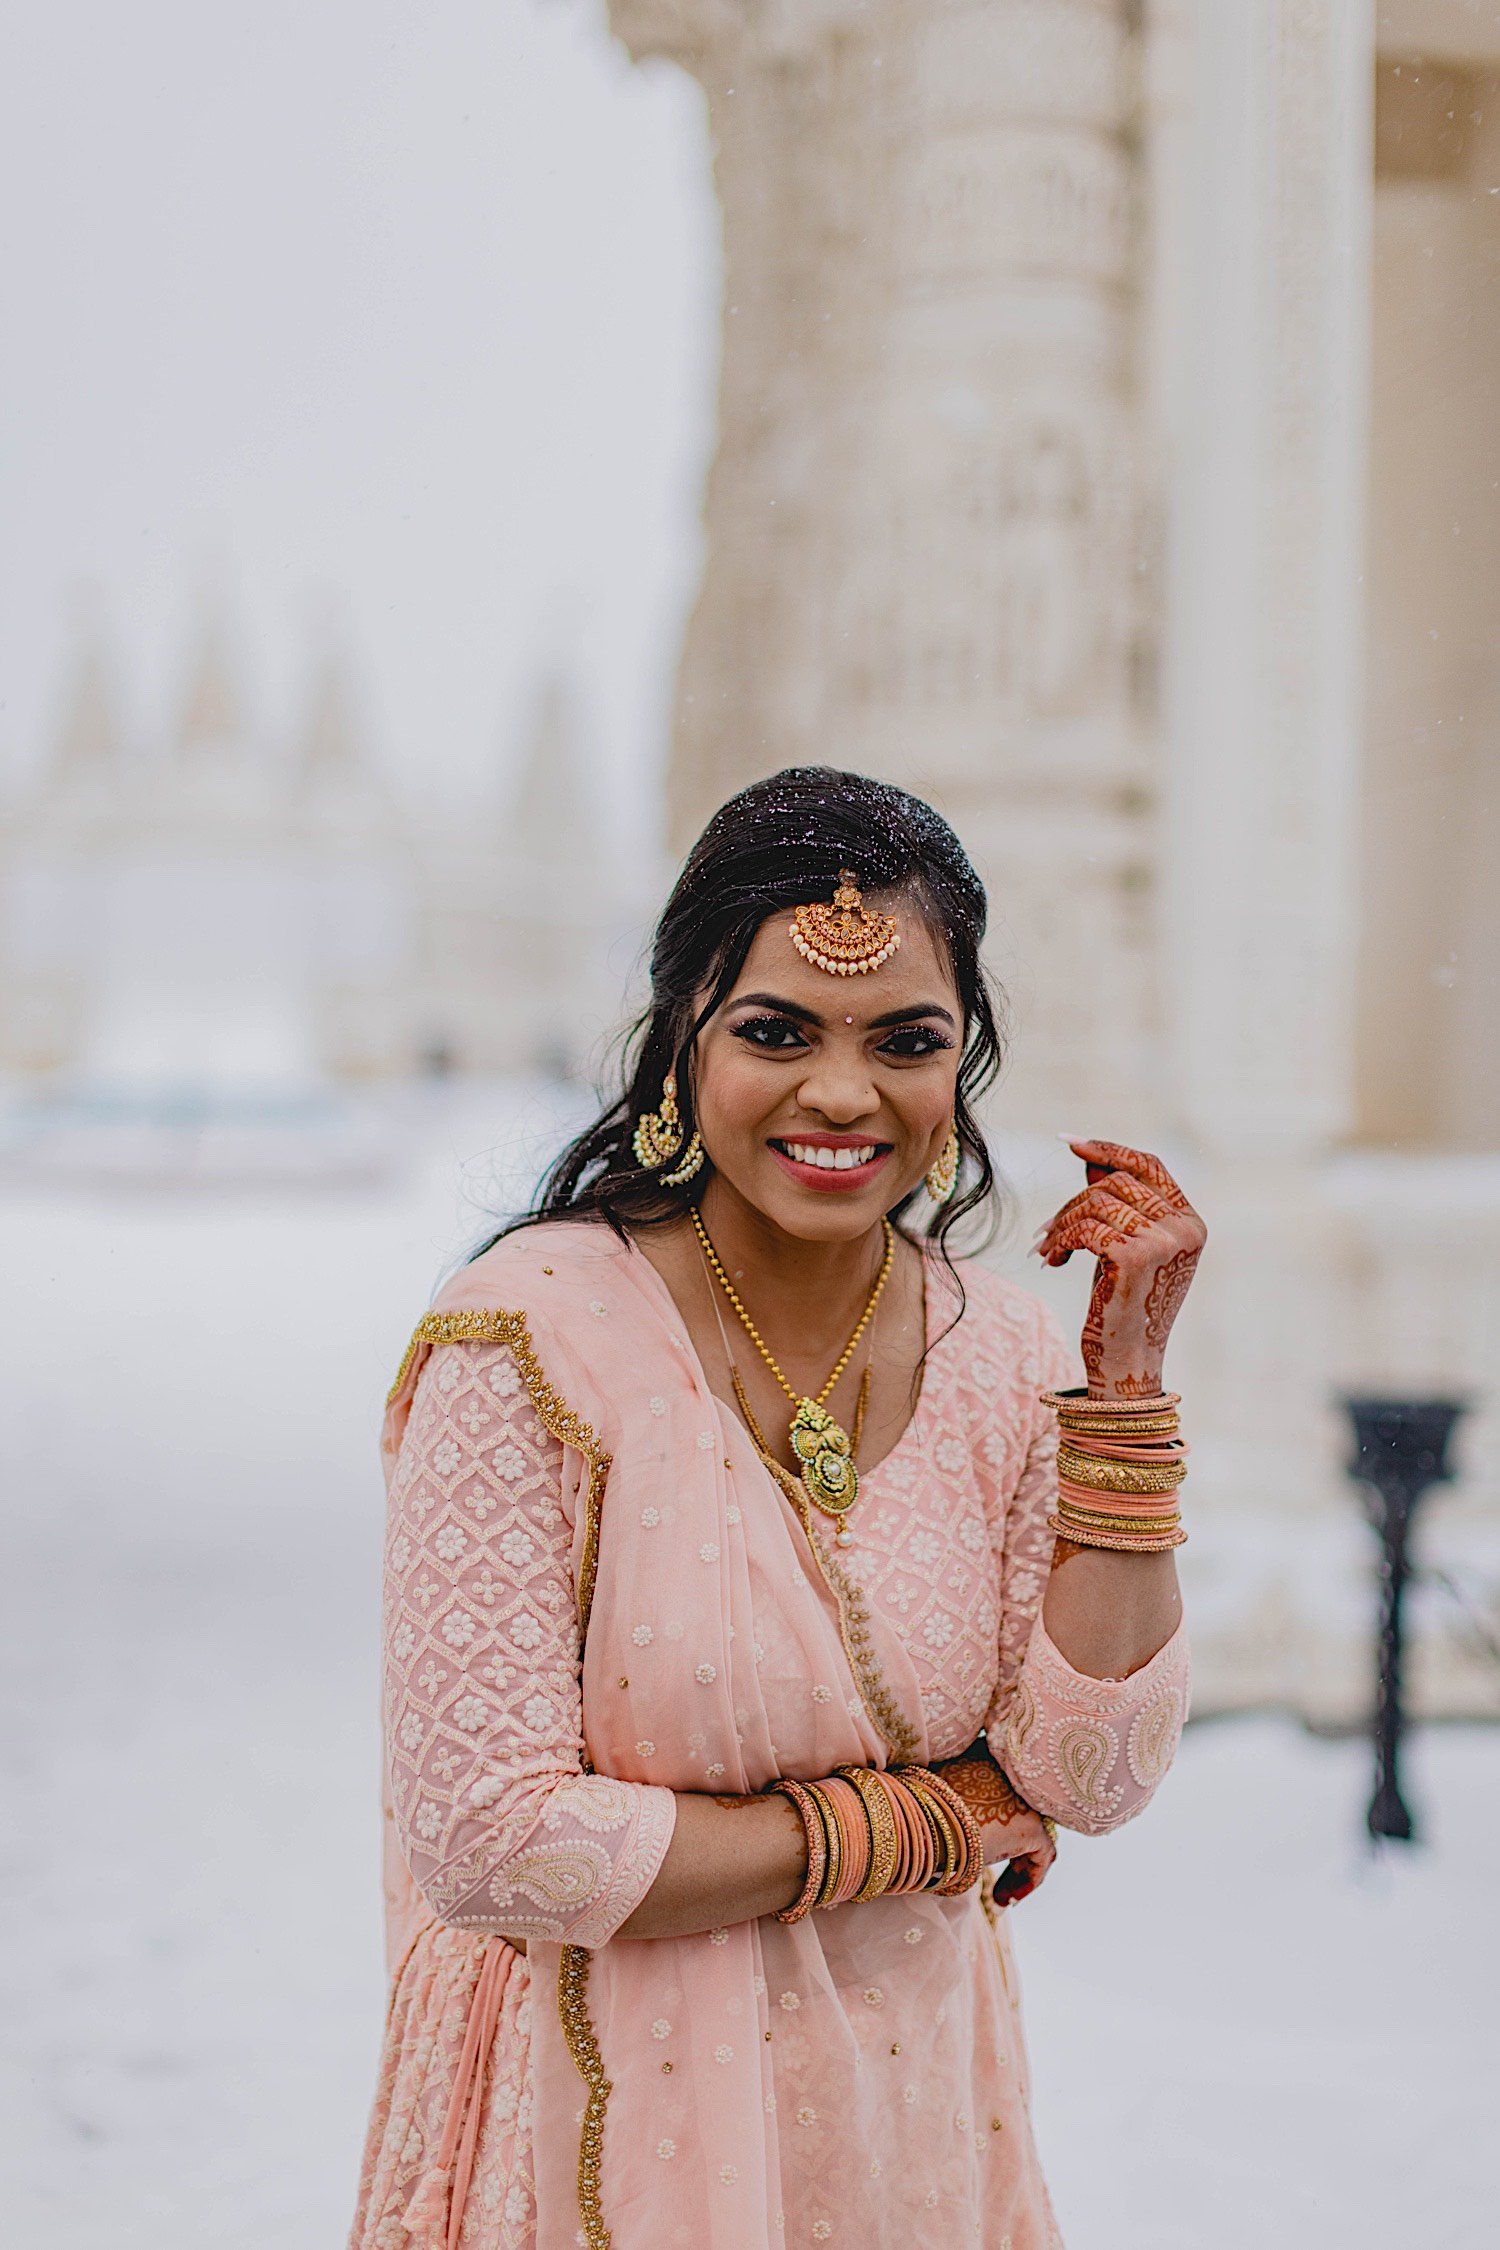 Bride wearing traditional Indian wedding attire smiles at the camera with snow in the background